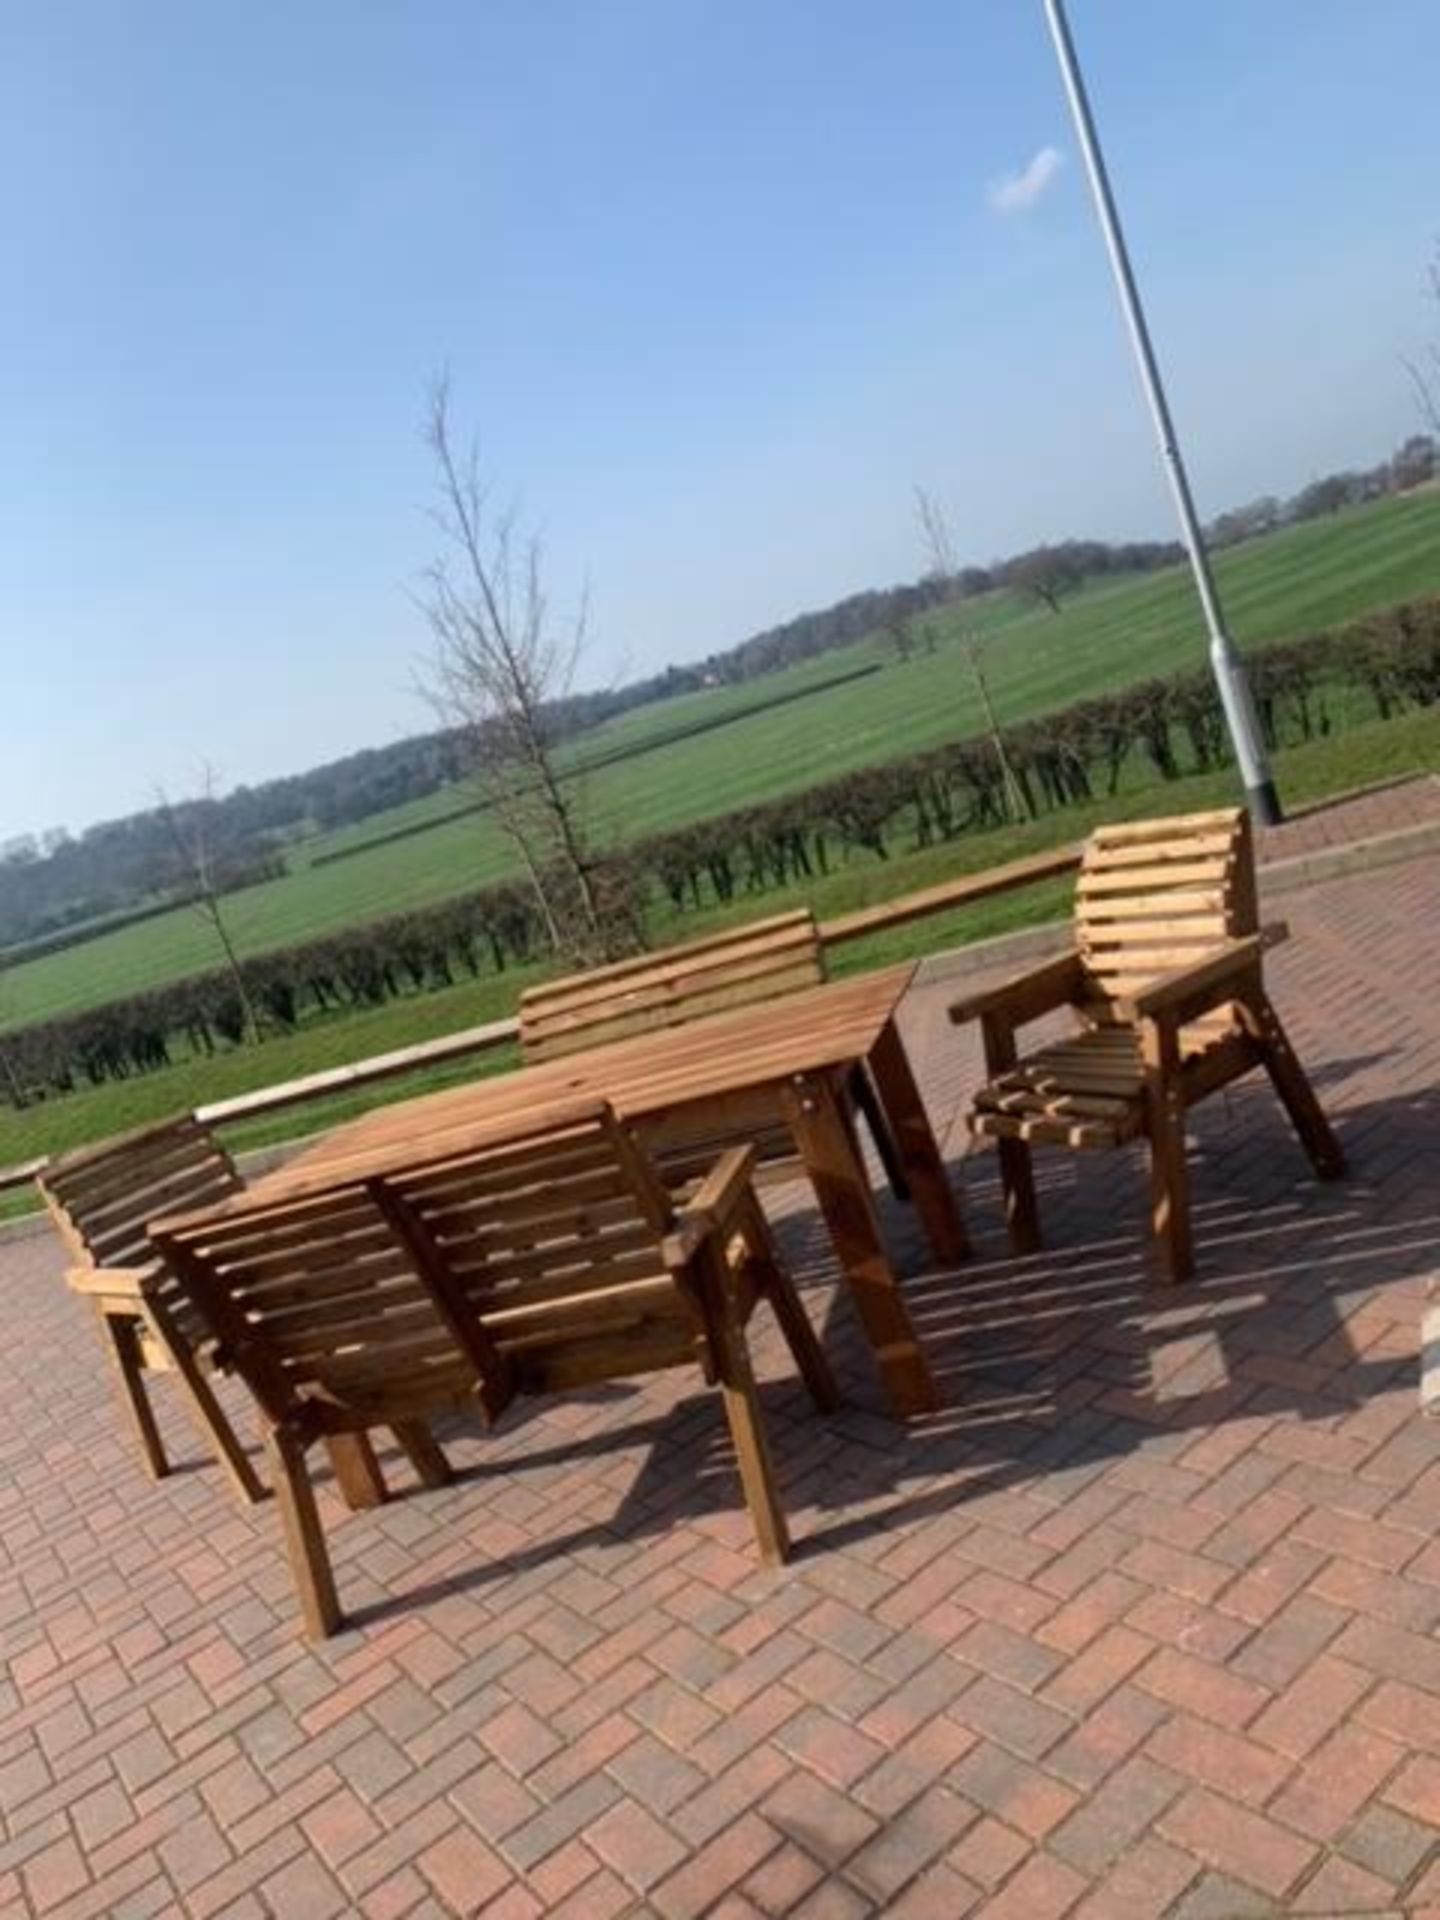 BRAND NEW QUALITY 6 seater handcrafted Garden Furniture set, Large table, 2 benches, 2 chairs - Image 6 of 6